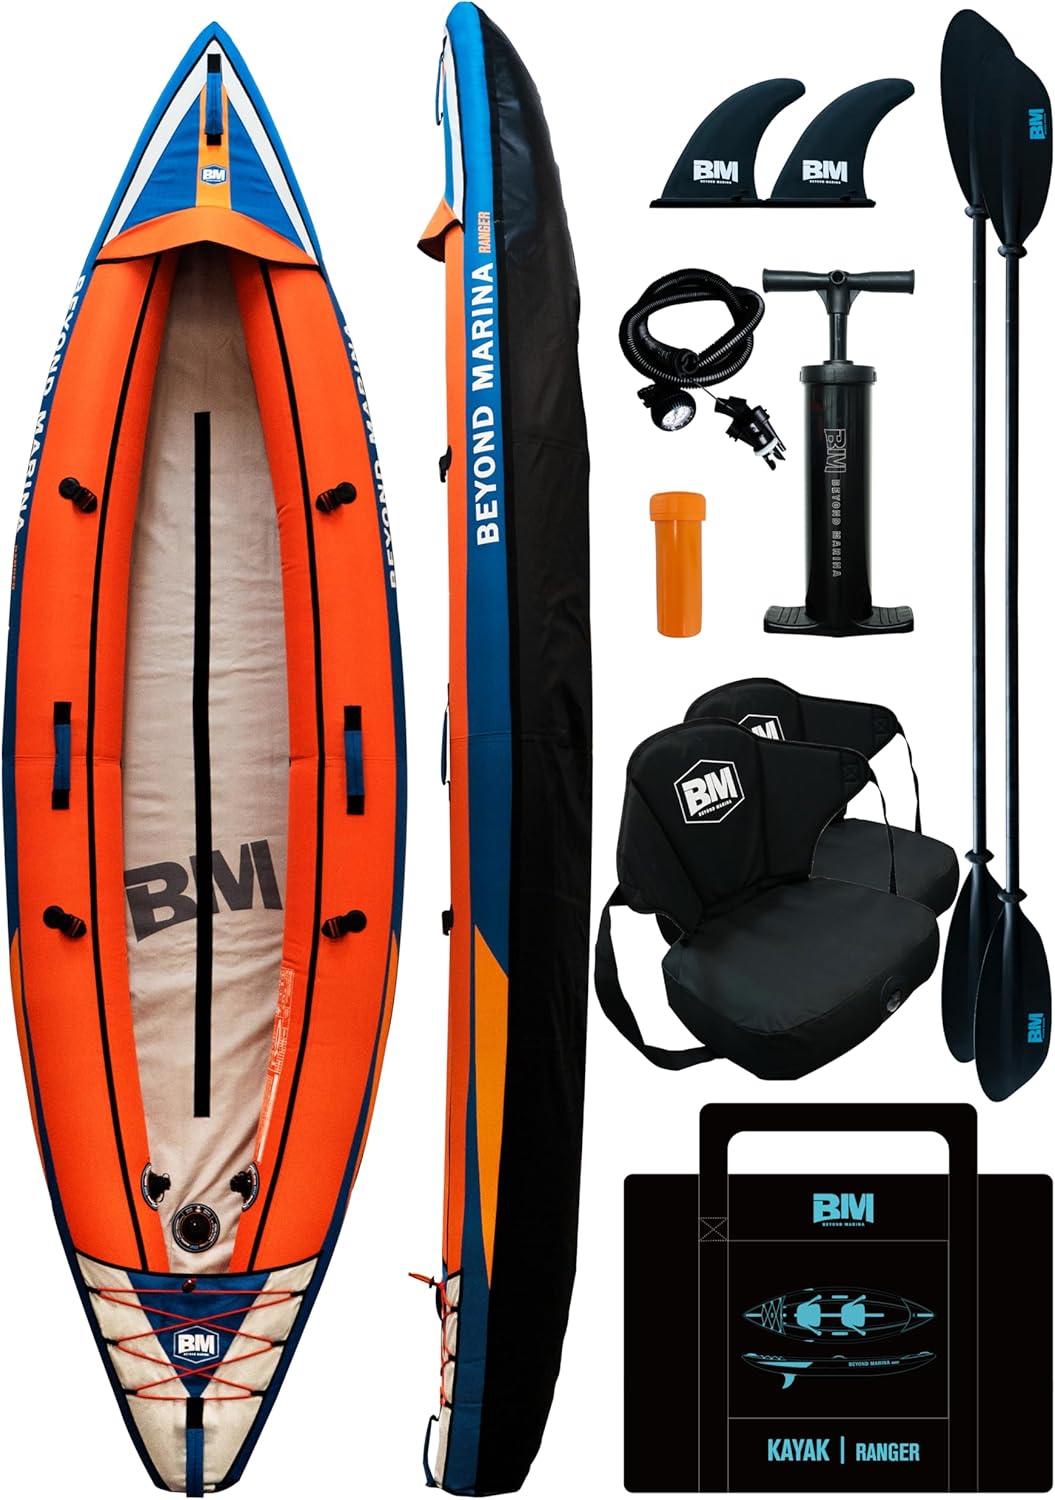 Ranger 11.15 FT Inflatable Kayak for 2 Persons